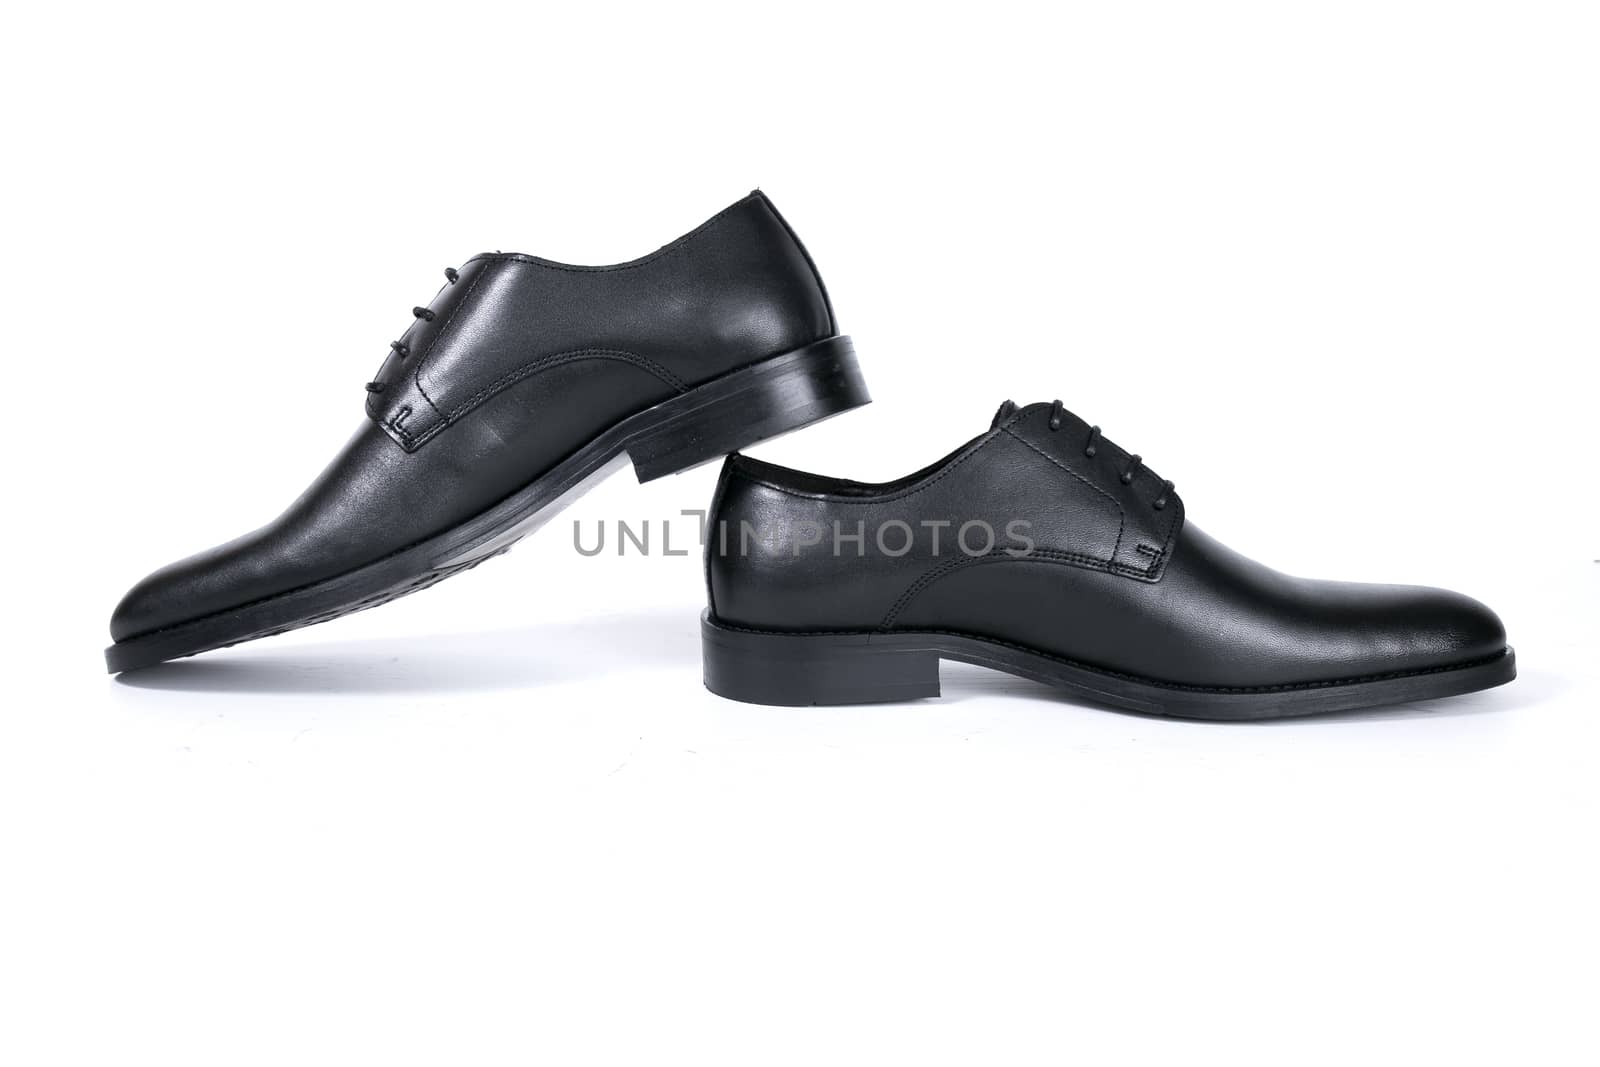 Pair of black shoes on white background, isolated product. by GeorgeVieiraSilva